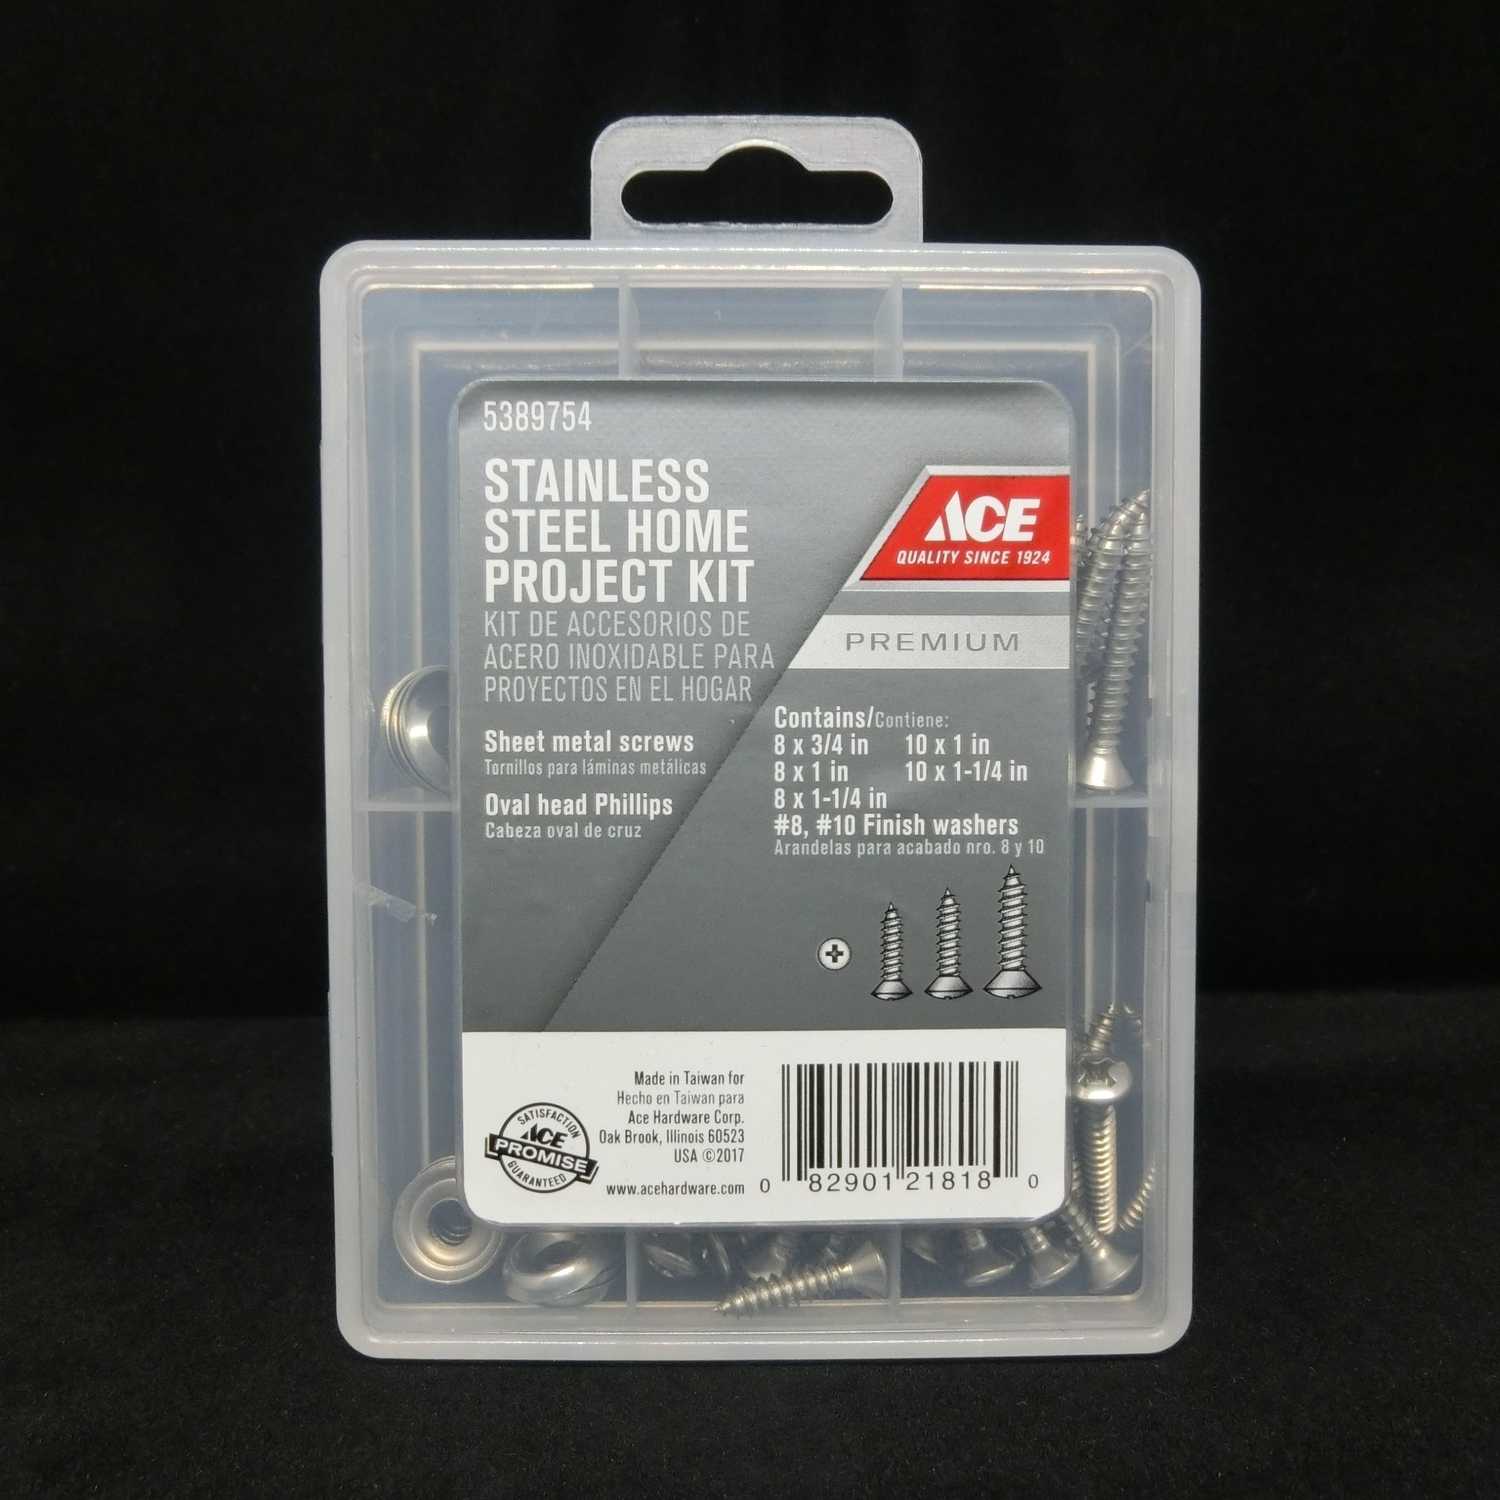 Ace 3/4 11/4 in. L x 8 10 Sizes Phillips Oval Head Stainless Steel Sheet Metal Screw Kit